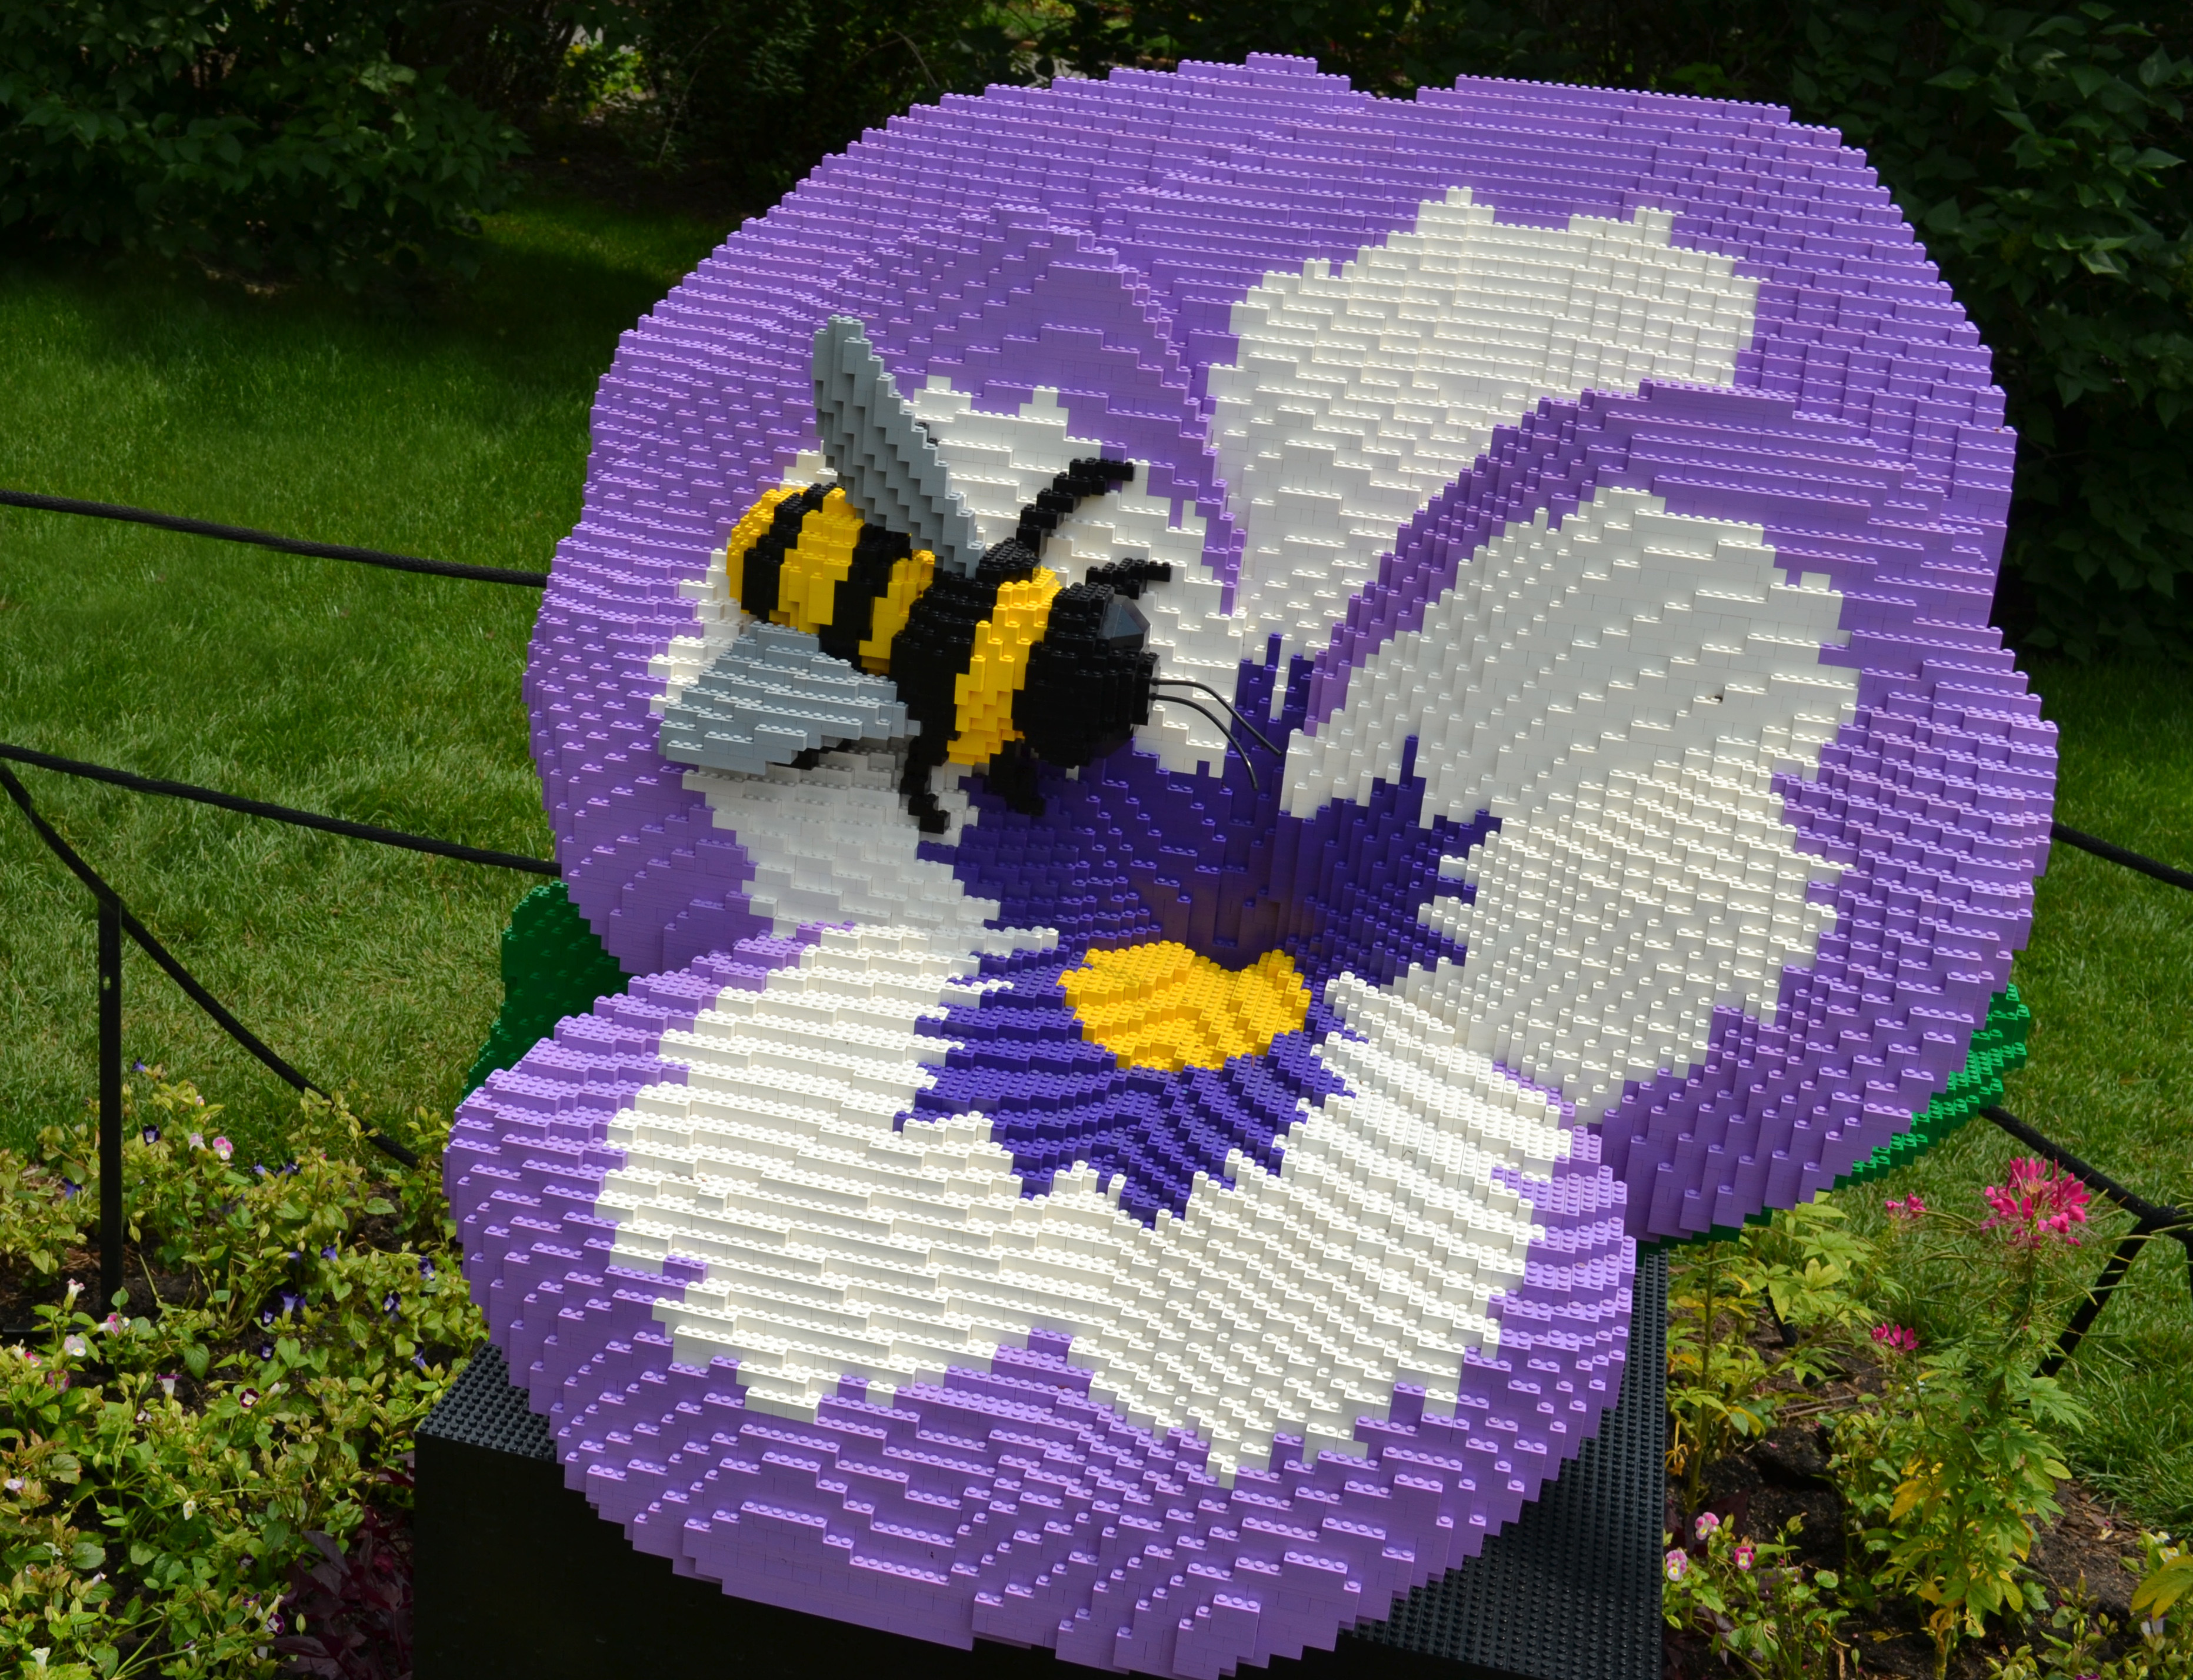 Greatest LEGO artist - Pansy and bee